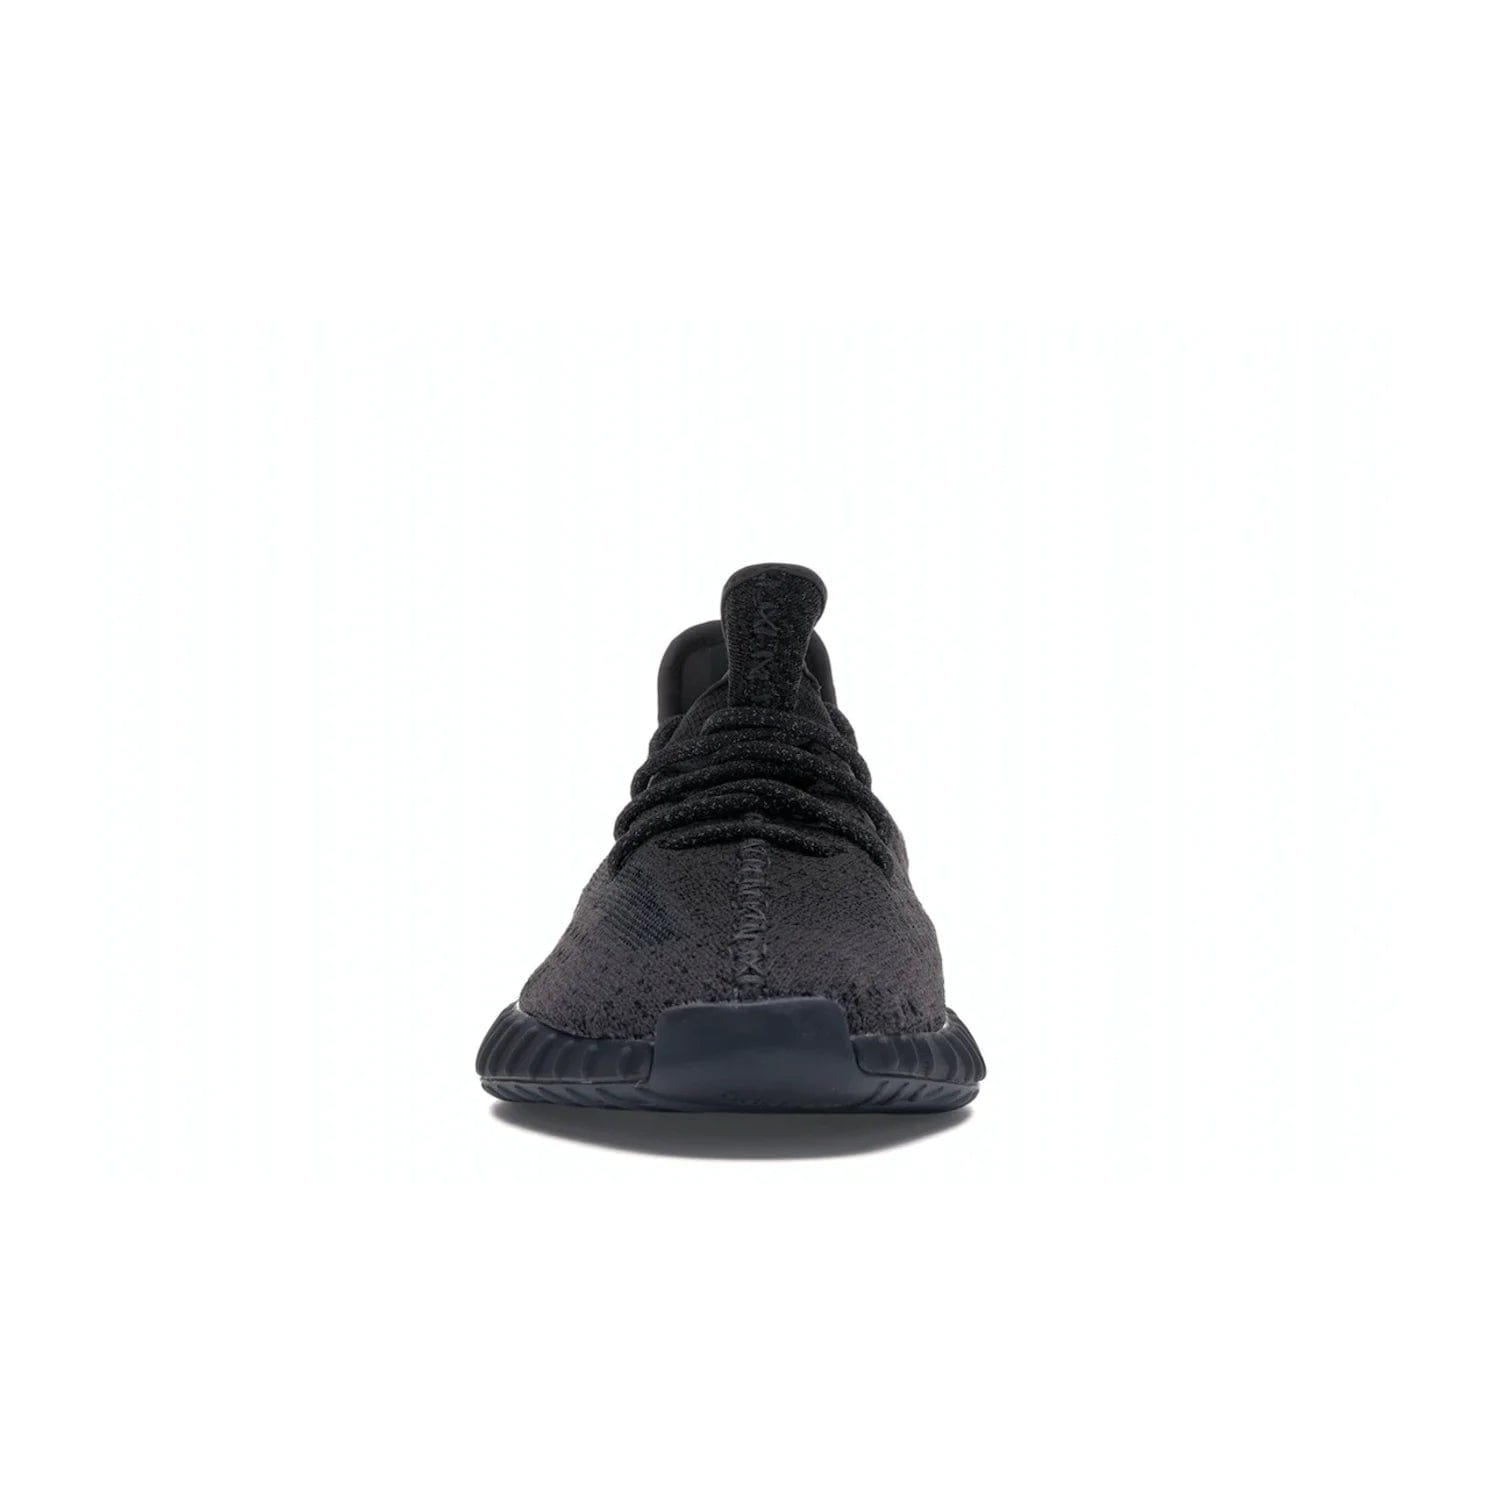 adidas Yeezy Boost 350 V2 Static Black (Reflective) - Image 10 - Only at www.BallersClubKickz.com - Make a statement with the adidas Yeezy Boost 350 V2 Static Black Reflective. All-black upper, reflective accents, midsole, and sole combine for a stylish look. High quality materials. June 2019 release. Add to your collection today.